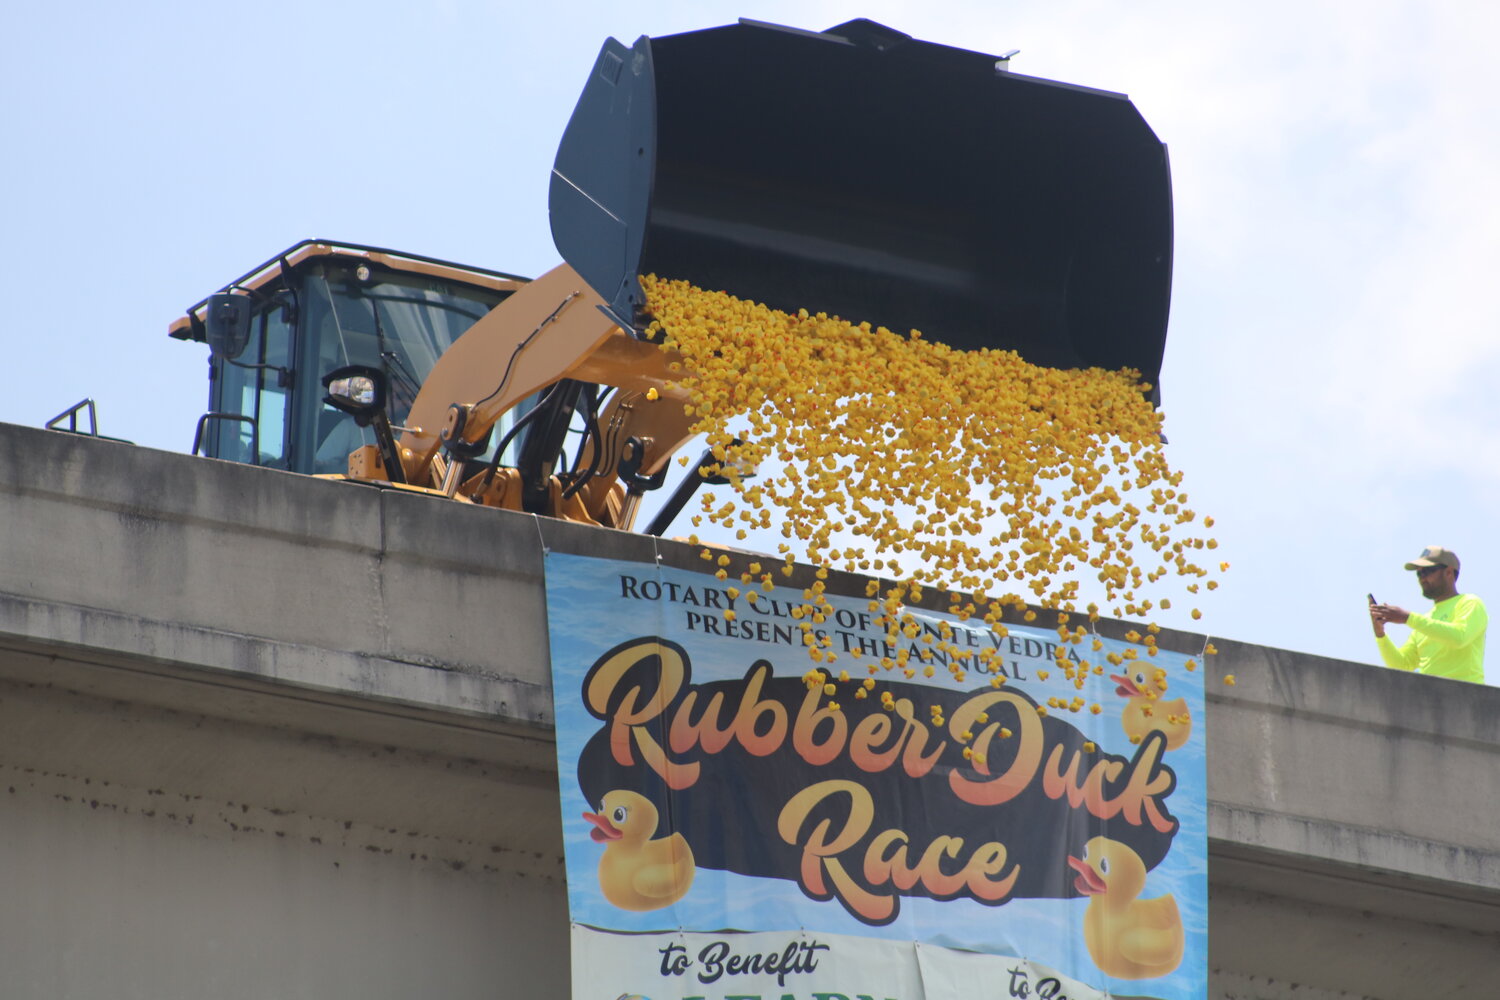 A front loader dumps 3,000 rubber ducks from Palm Valley Bridge during the annual Rotary Club of Ponte Vedra Rubber Duck Race.